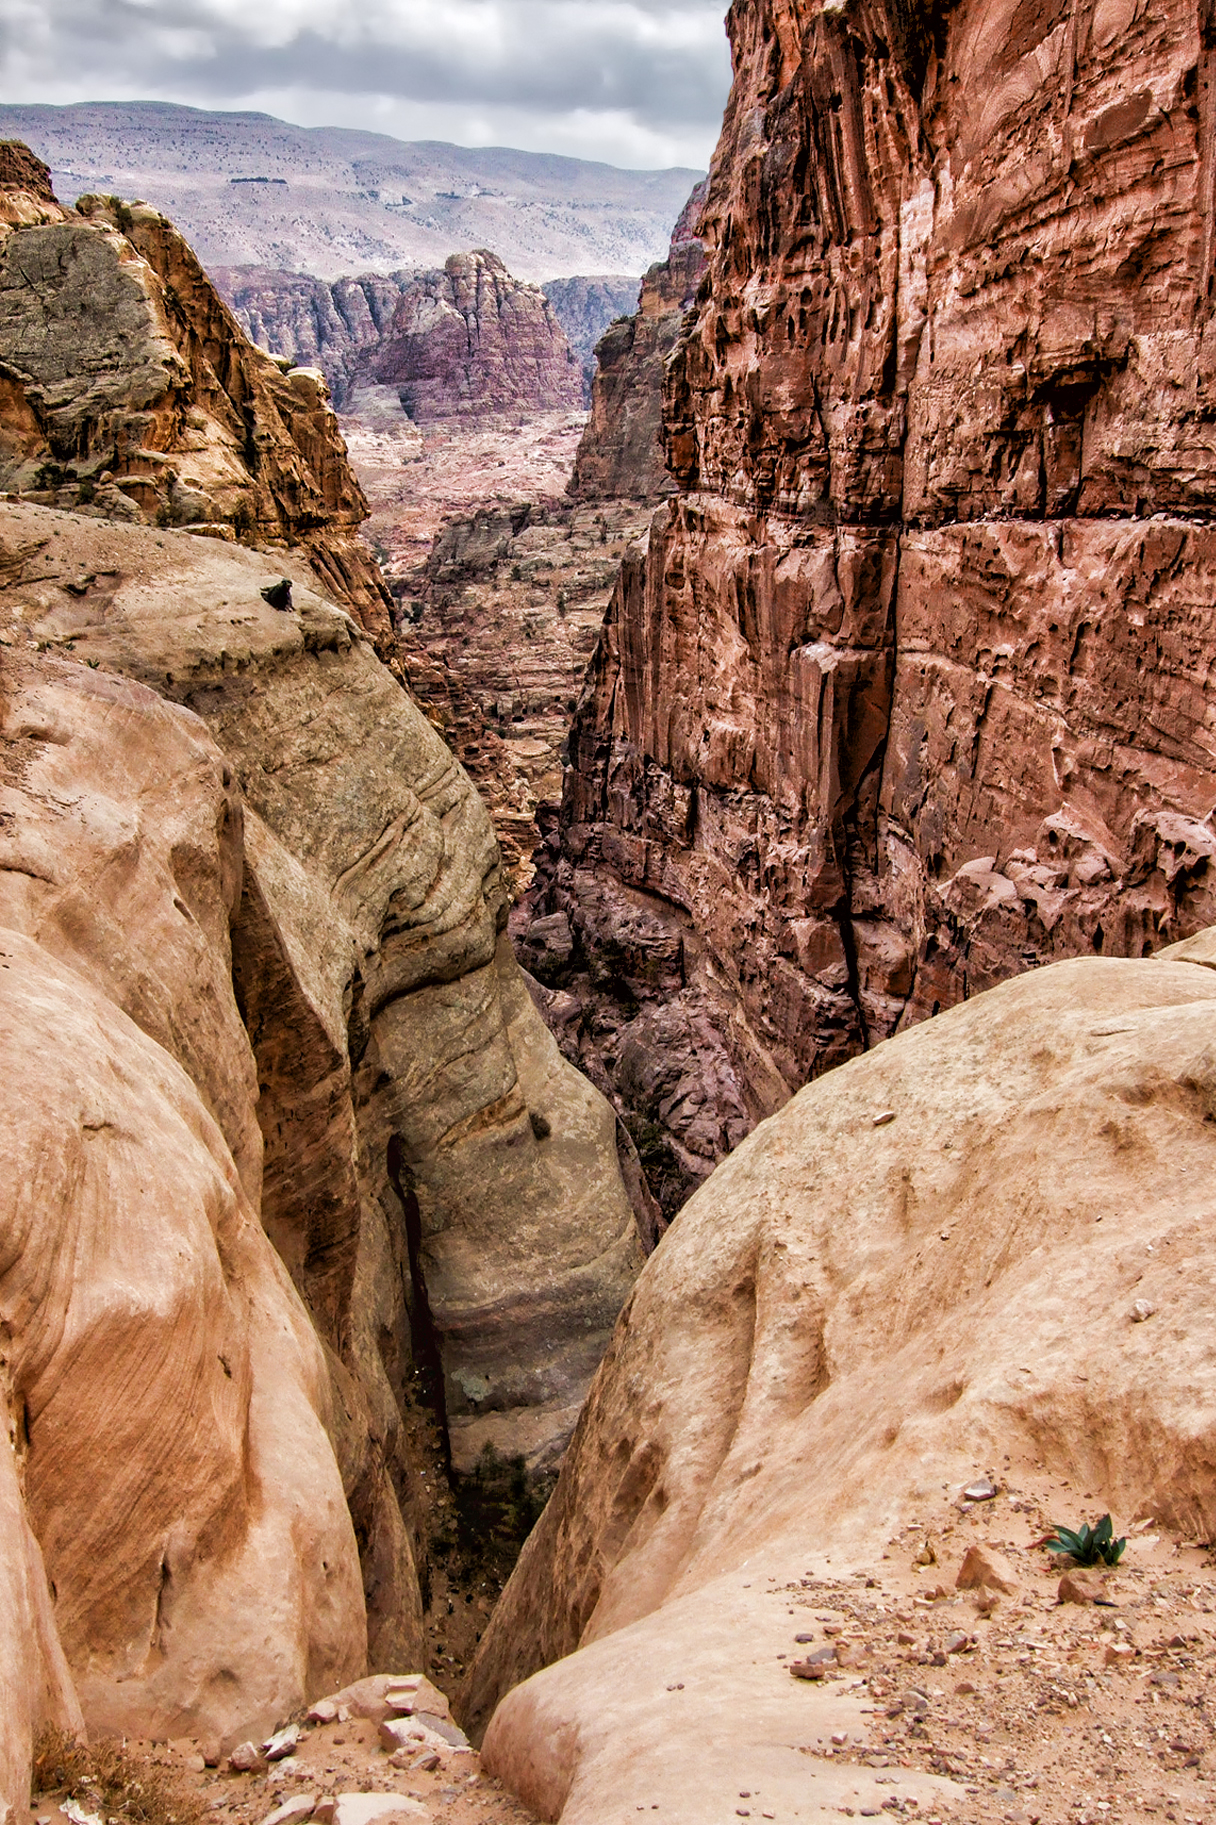 The canyons of Petra...